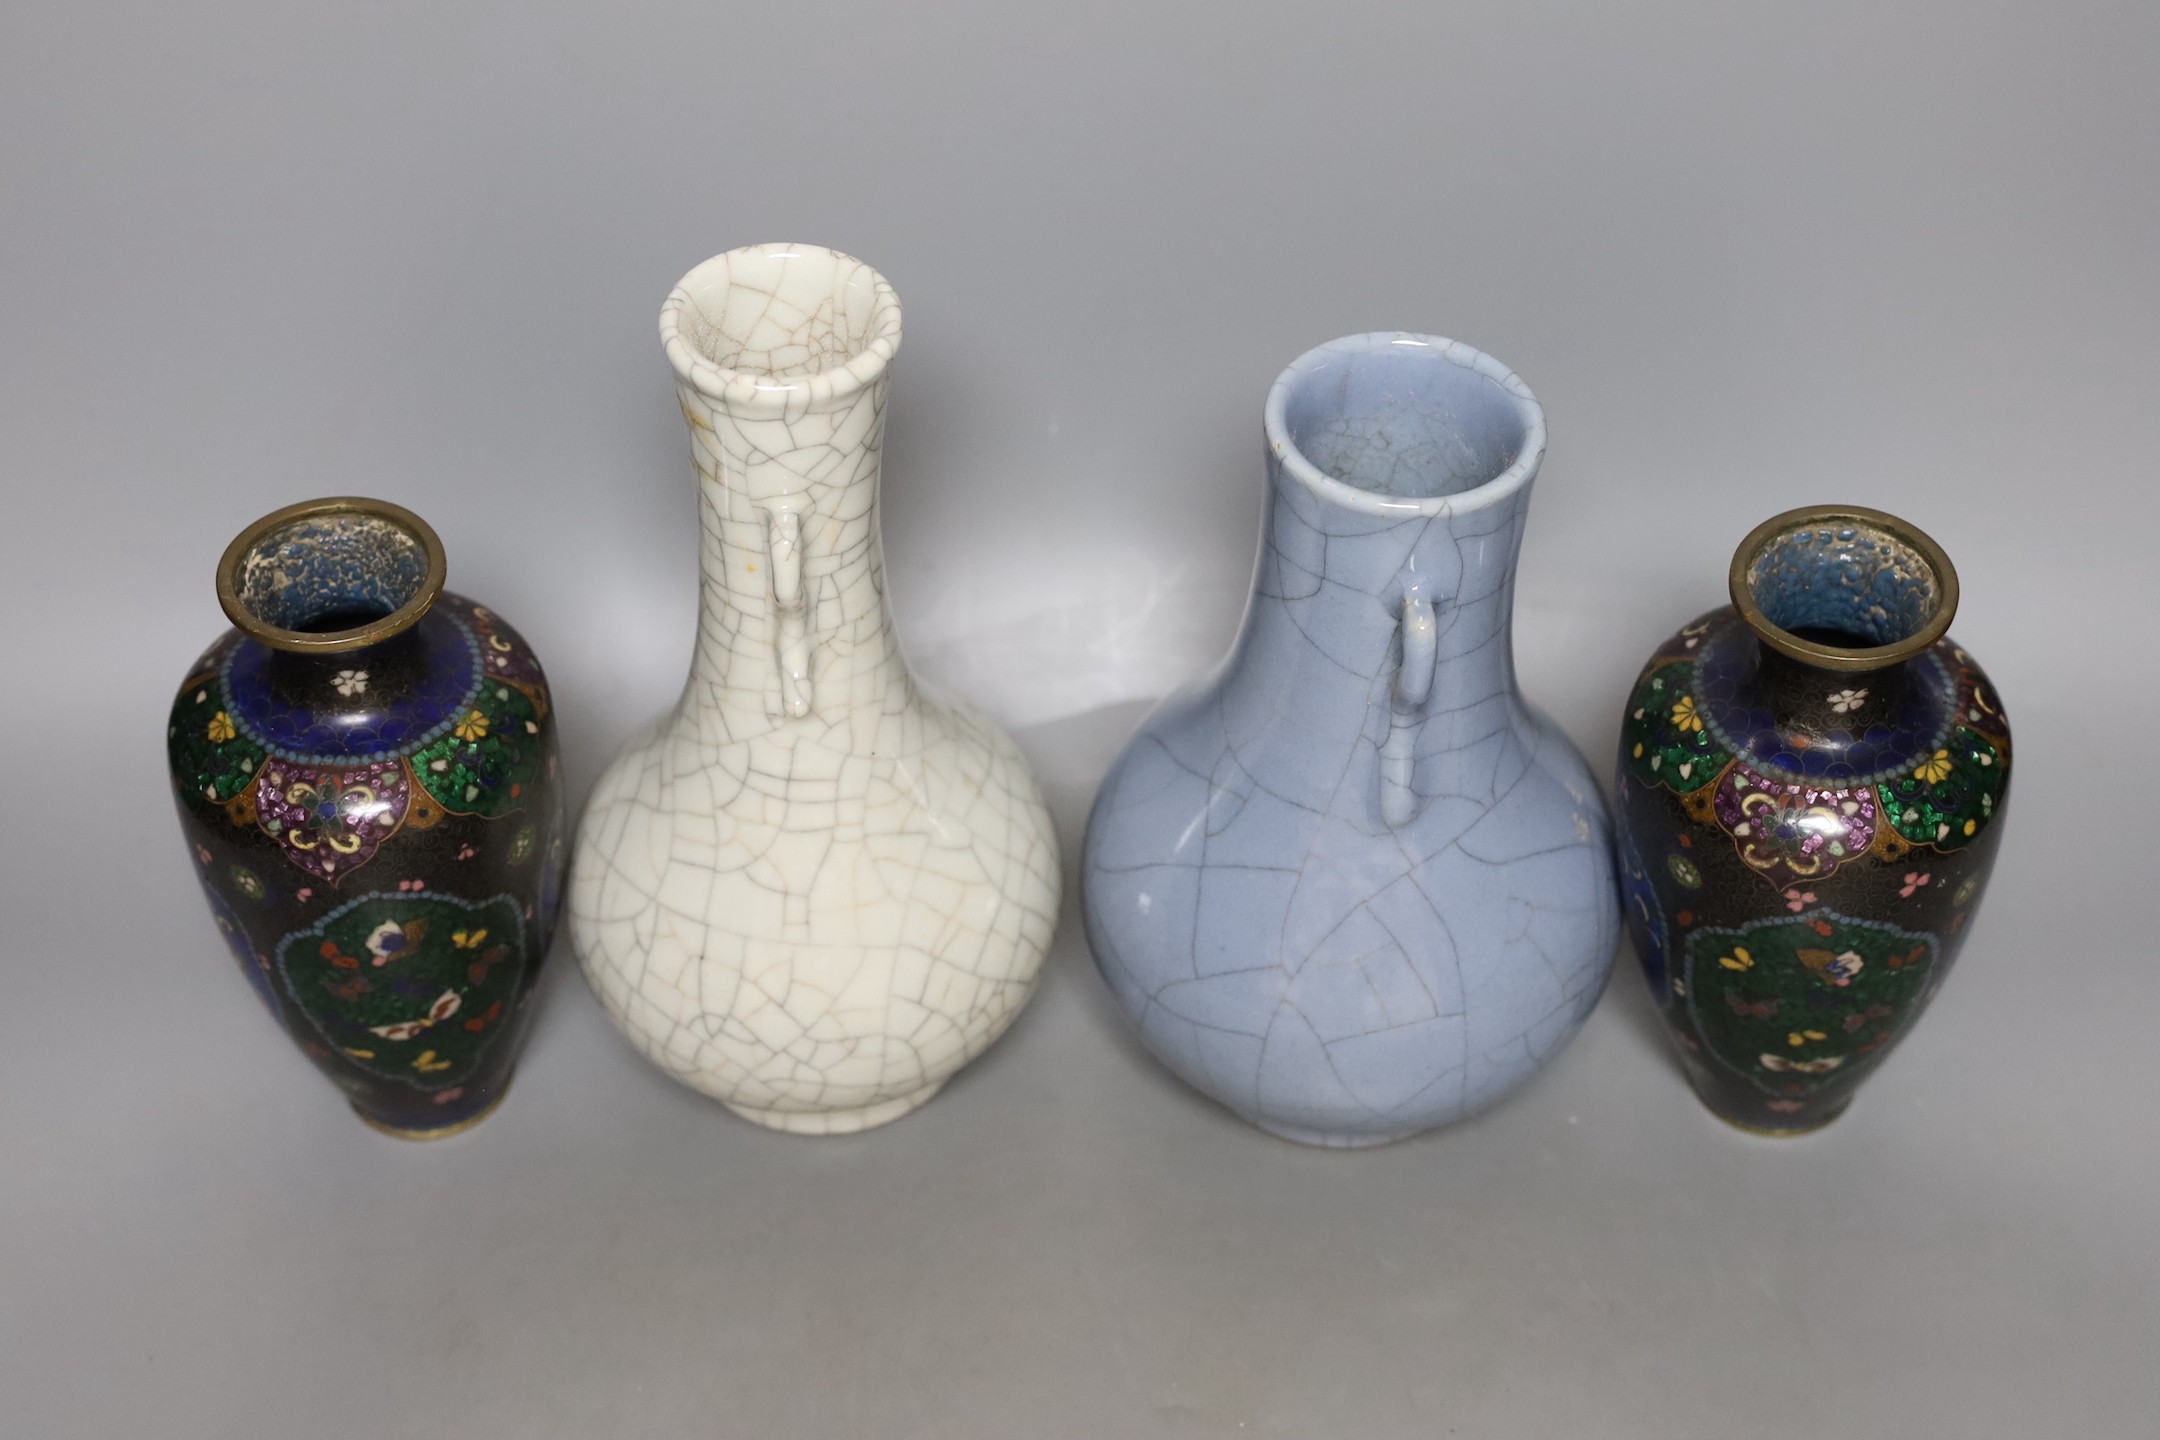 Two Chinese crackle glaze vases together with two Japanese cloisonné enamel vases (4) - tallest 24.5cm